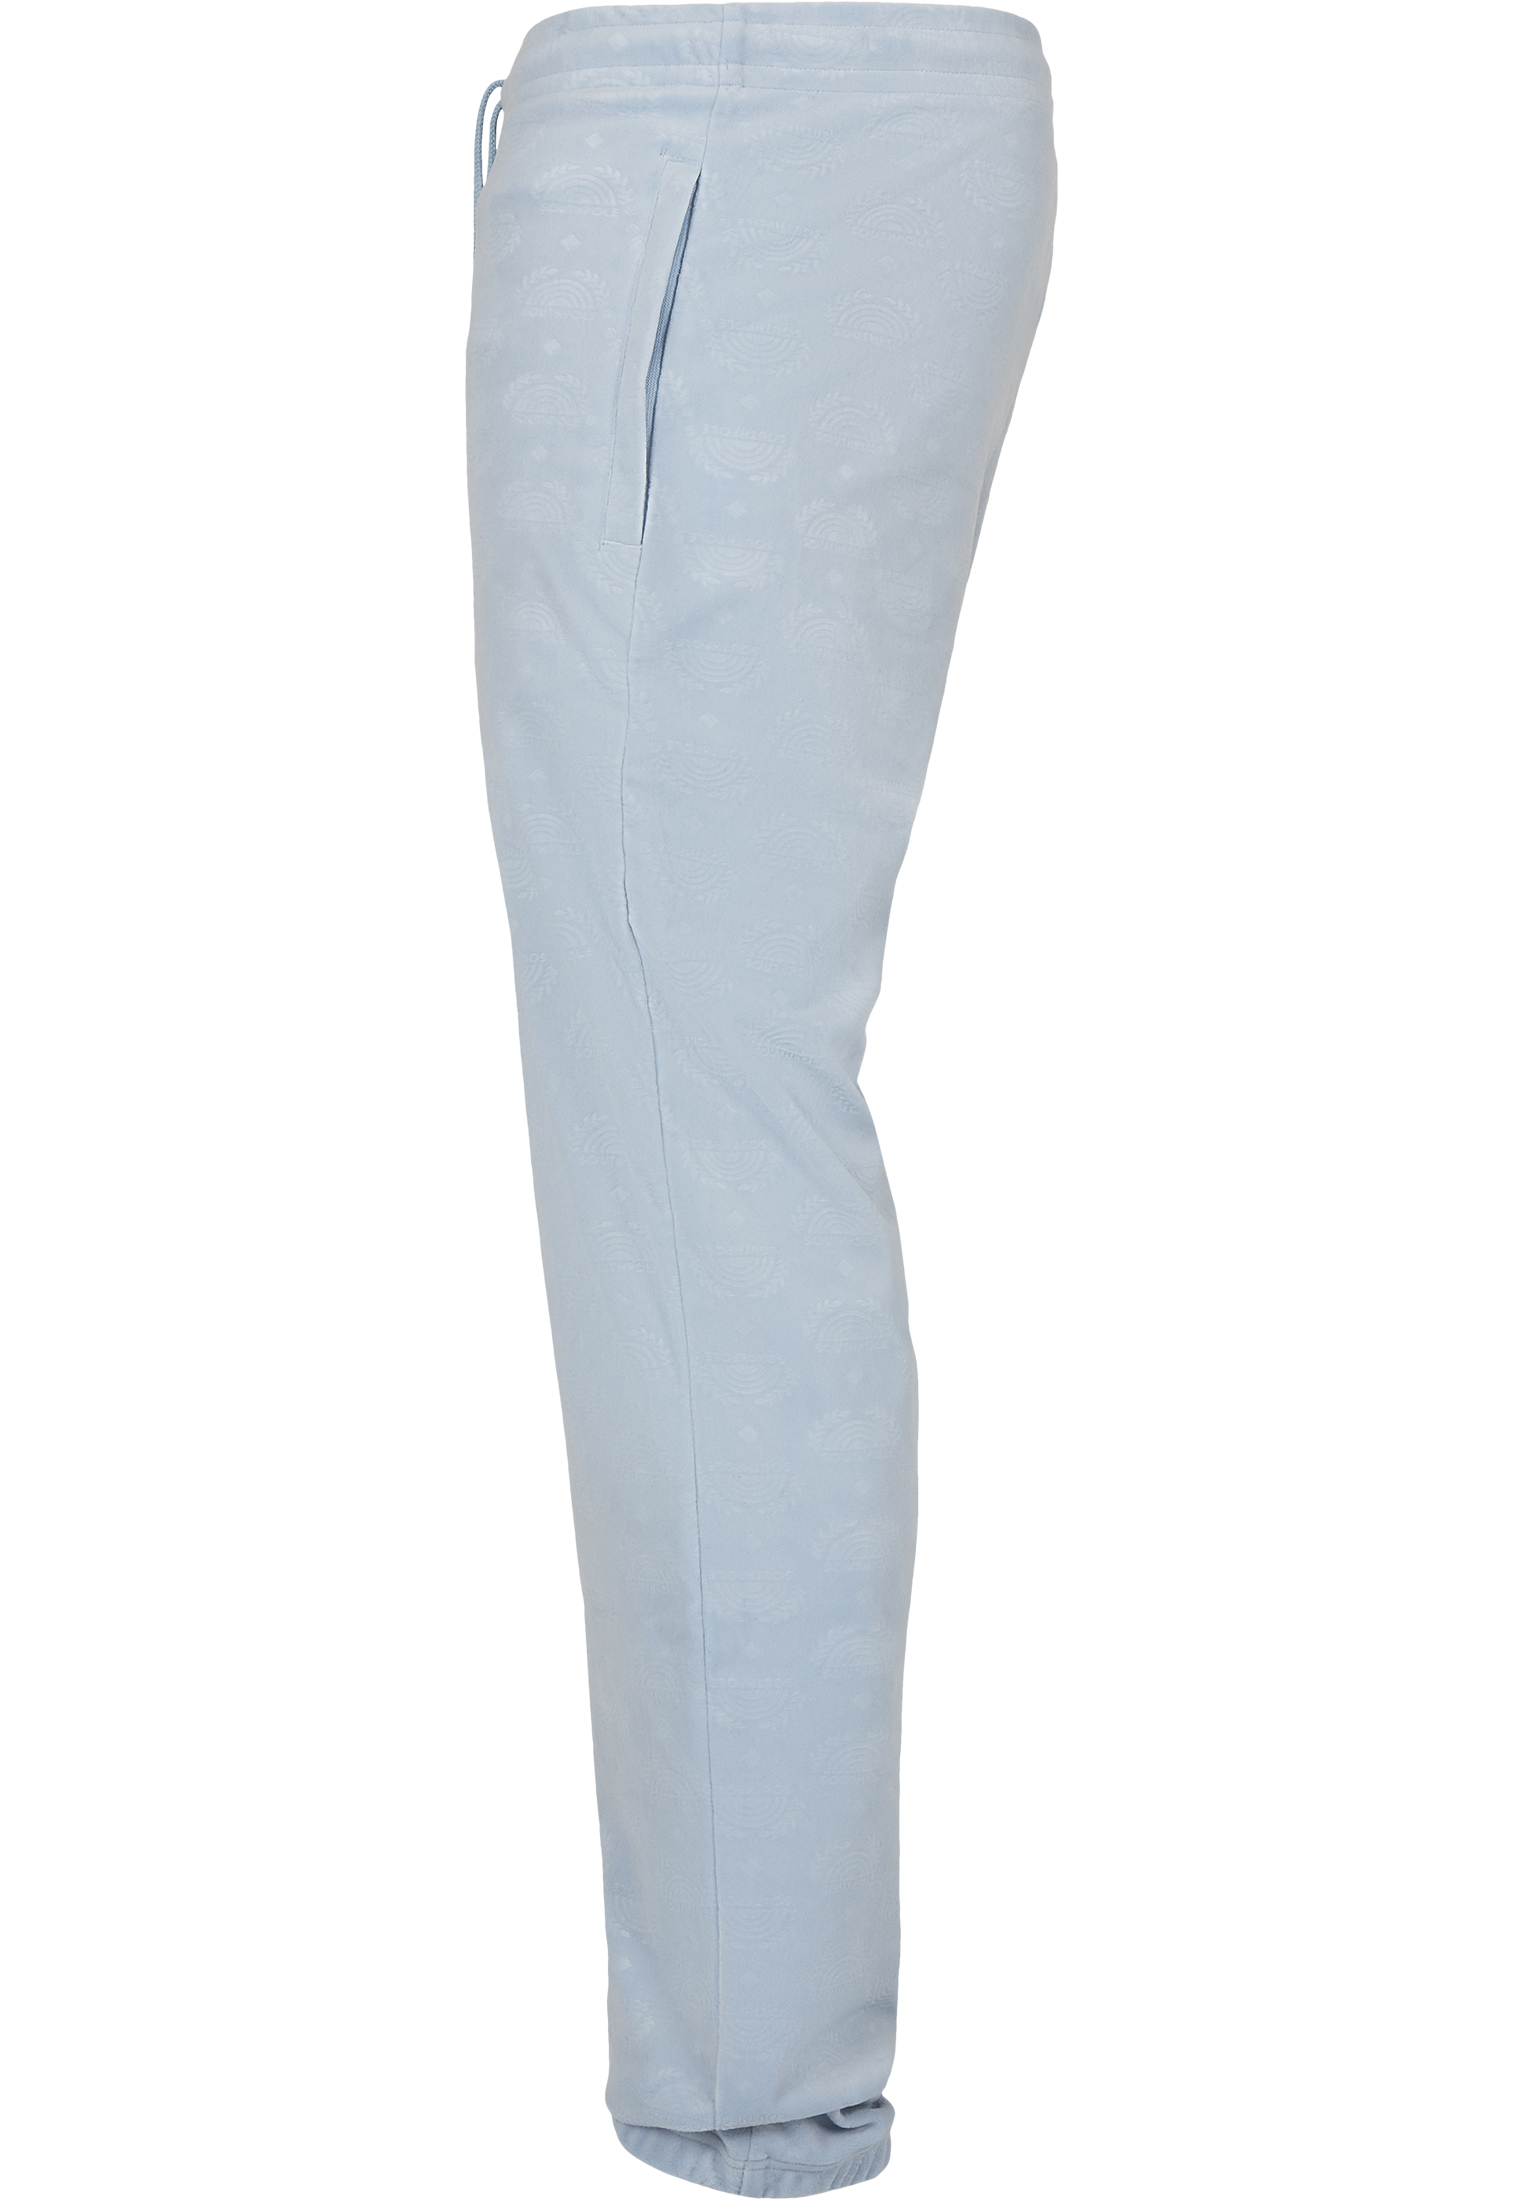 Saisonware Southpole AOP Velour Pants in Farbe babyblue